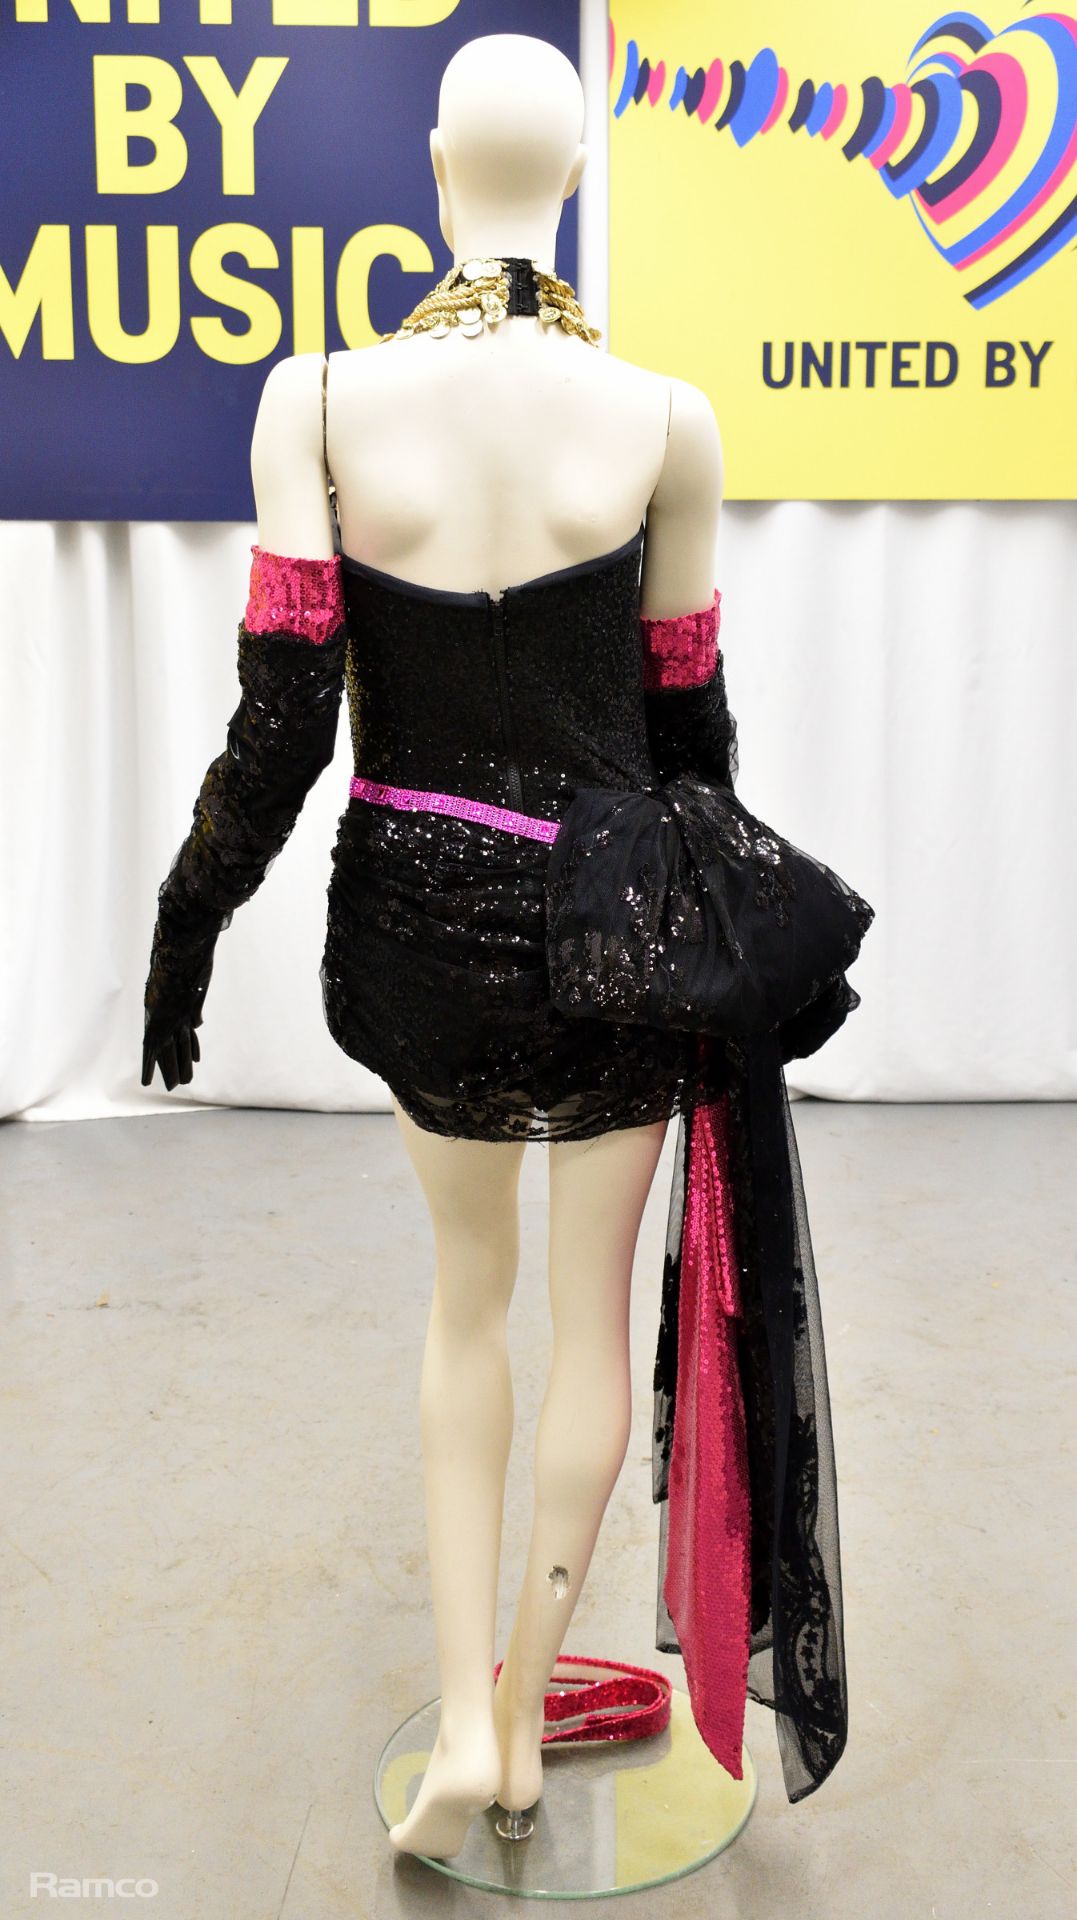 Outfit worn by Mercedes Bends (as host Alisha Dixon) during the performance of 'Be Who You Wanna Be' - Bild 5 aus 7